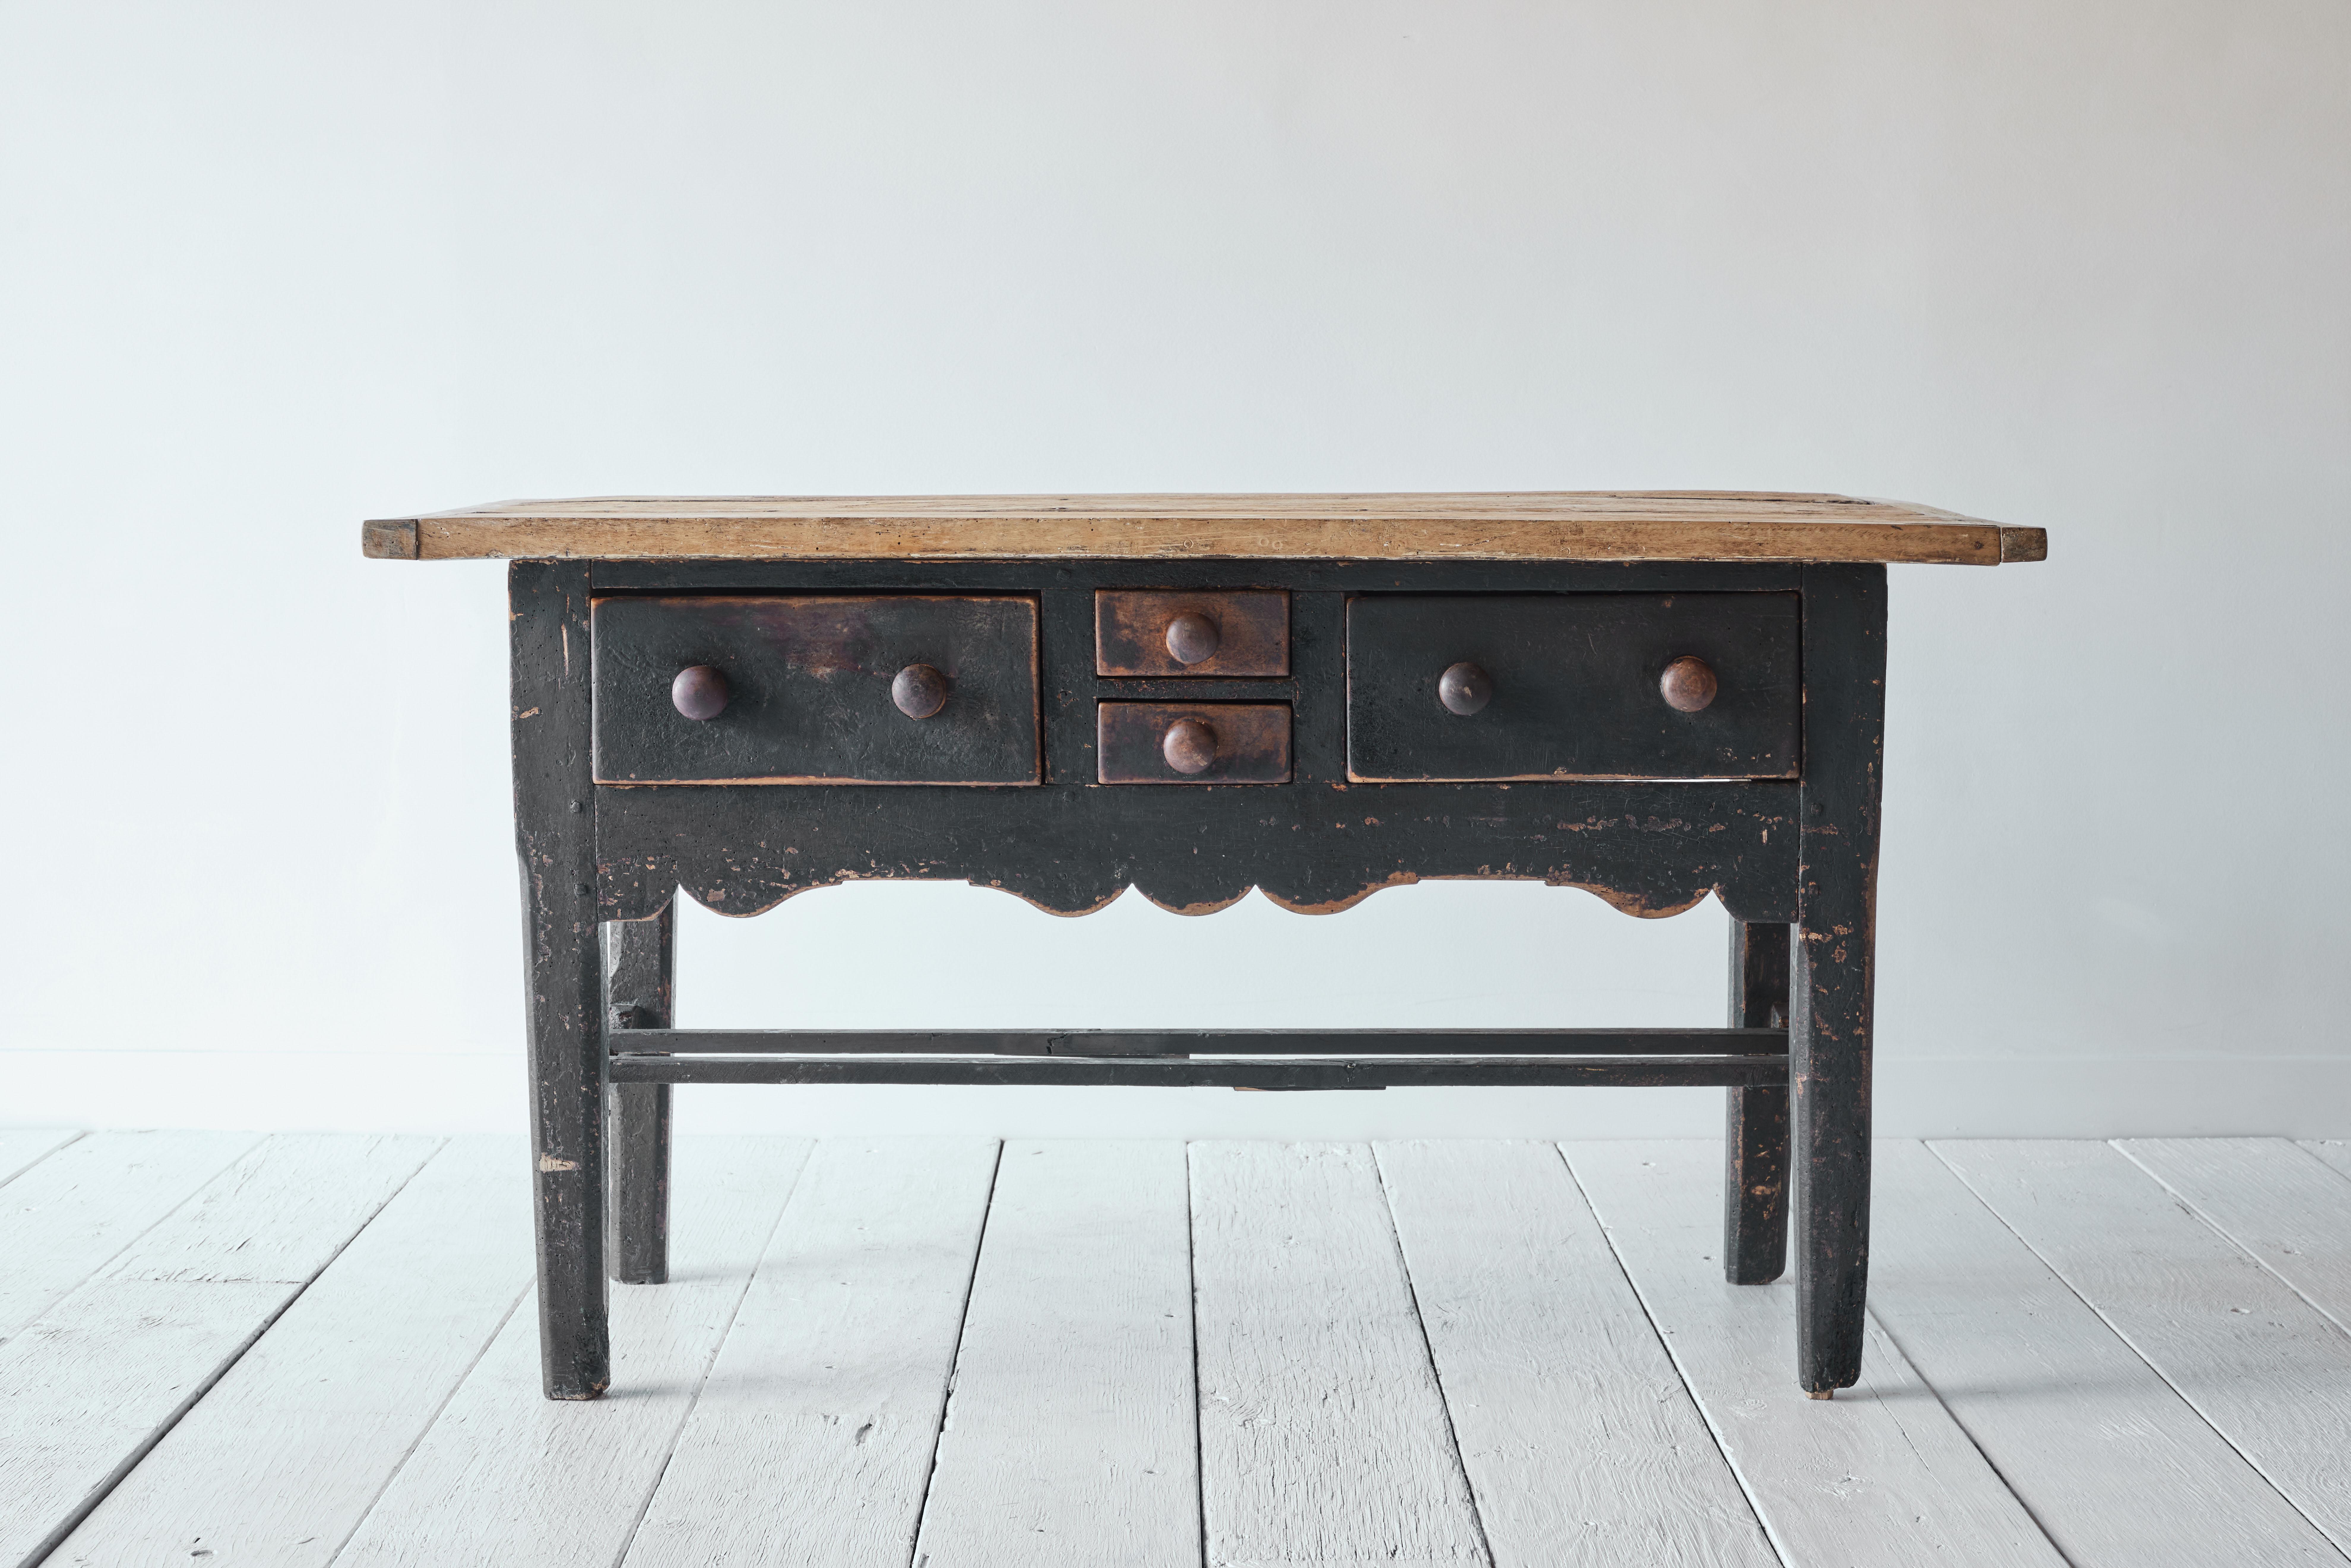 A unique 19th century French work table with black painted base and natural wood top. This table features four drawers, an intricately carved skirt and two bottom trestles. This is the perfect piece for a kitchen island or a side table and has been